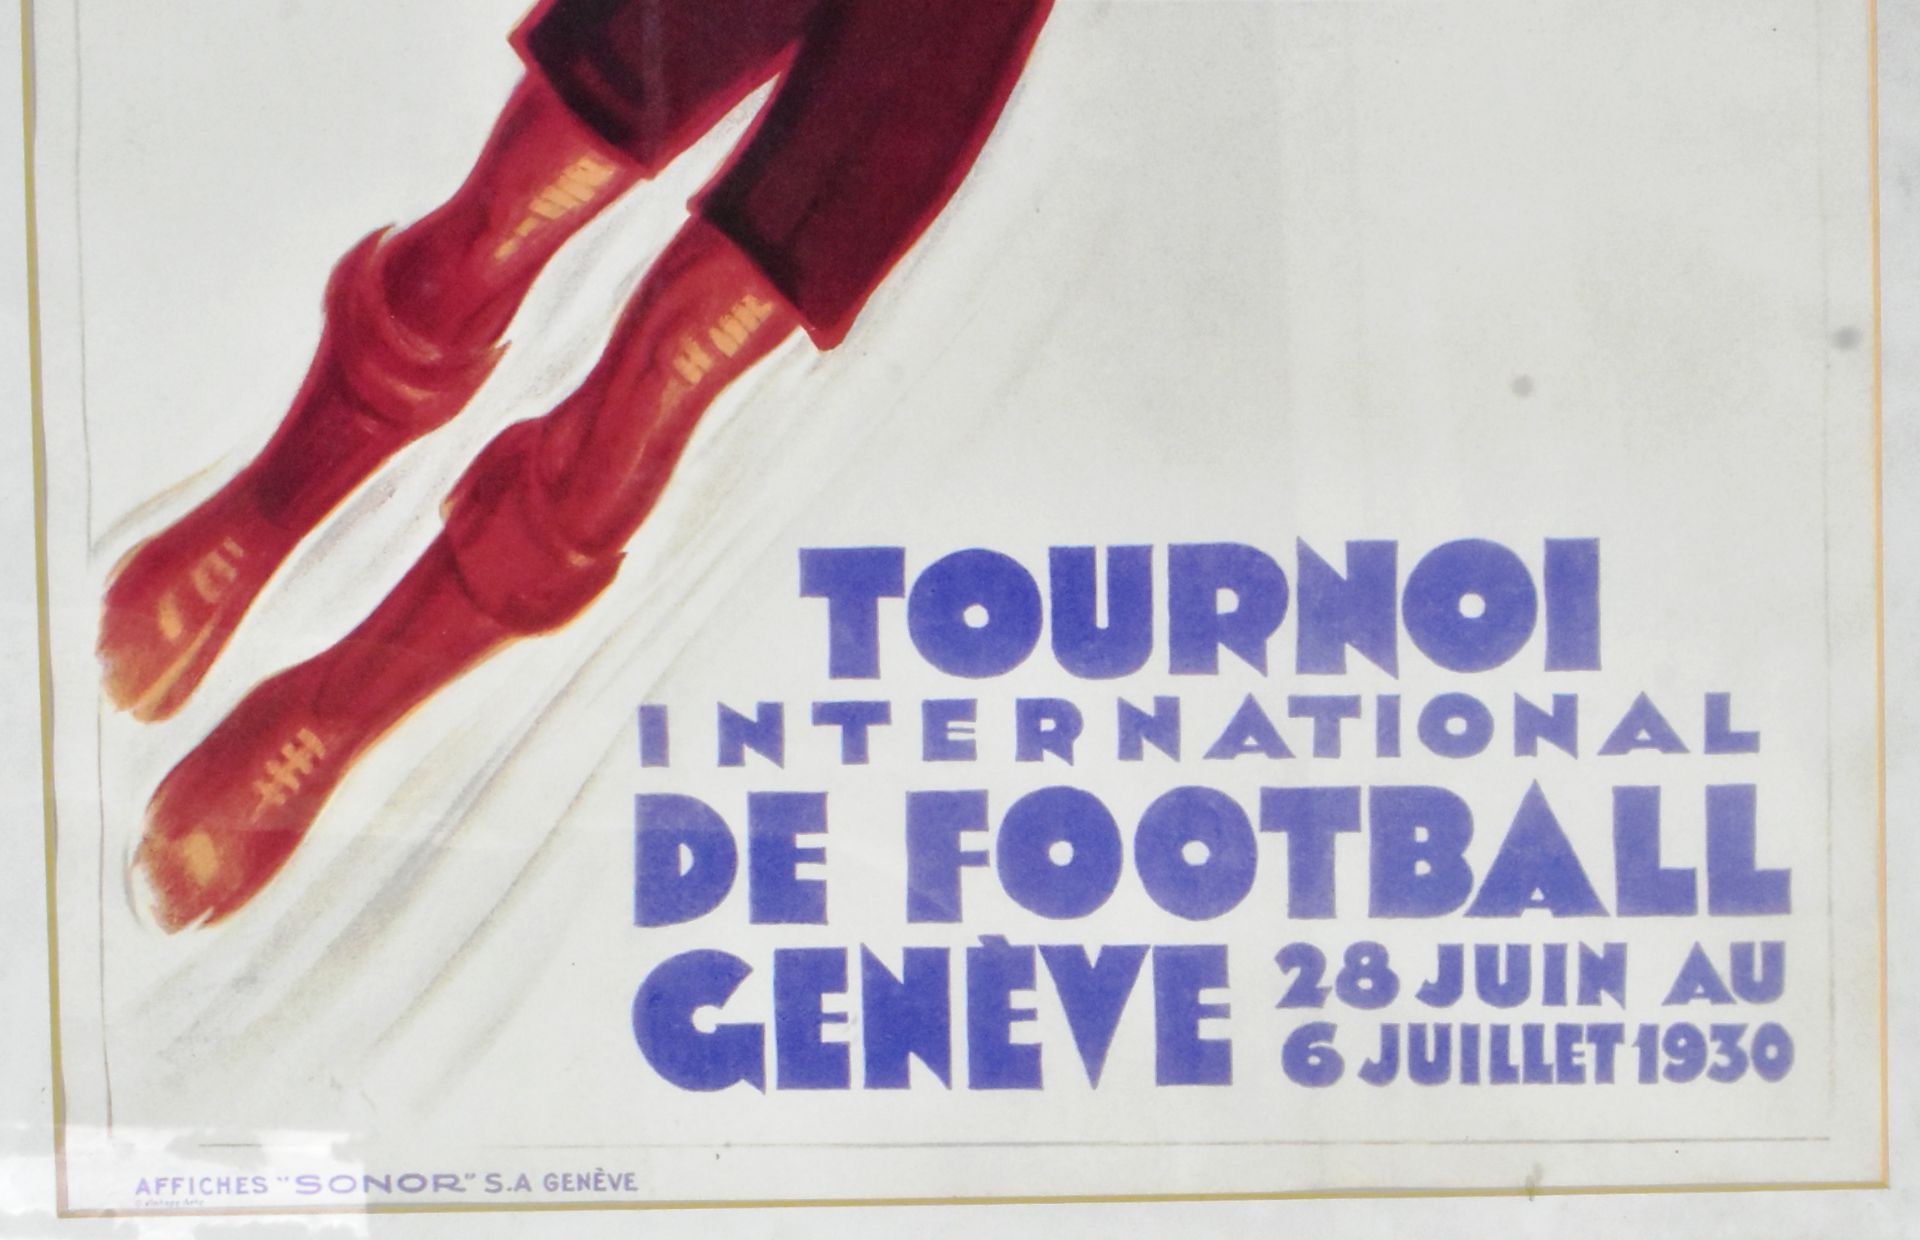 AFTER NOEL FONTANET - INTERNATIONAL FOOTBALL TOURNAMENT POSTER - Image 3 of 3